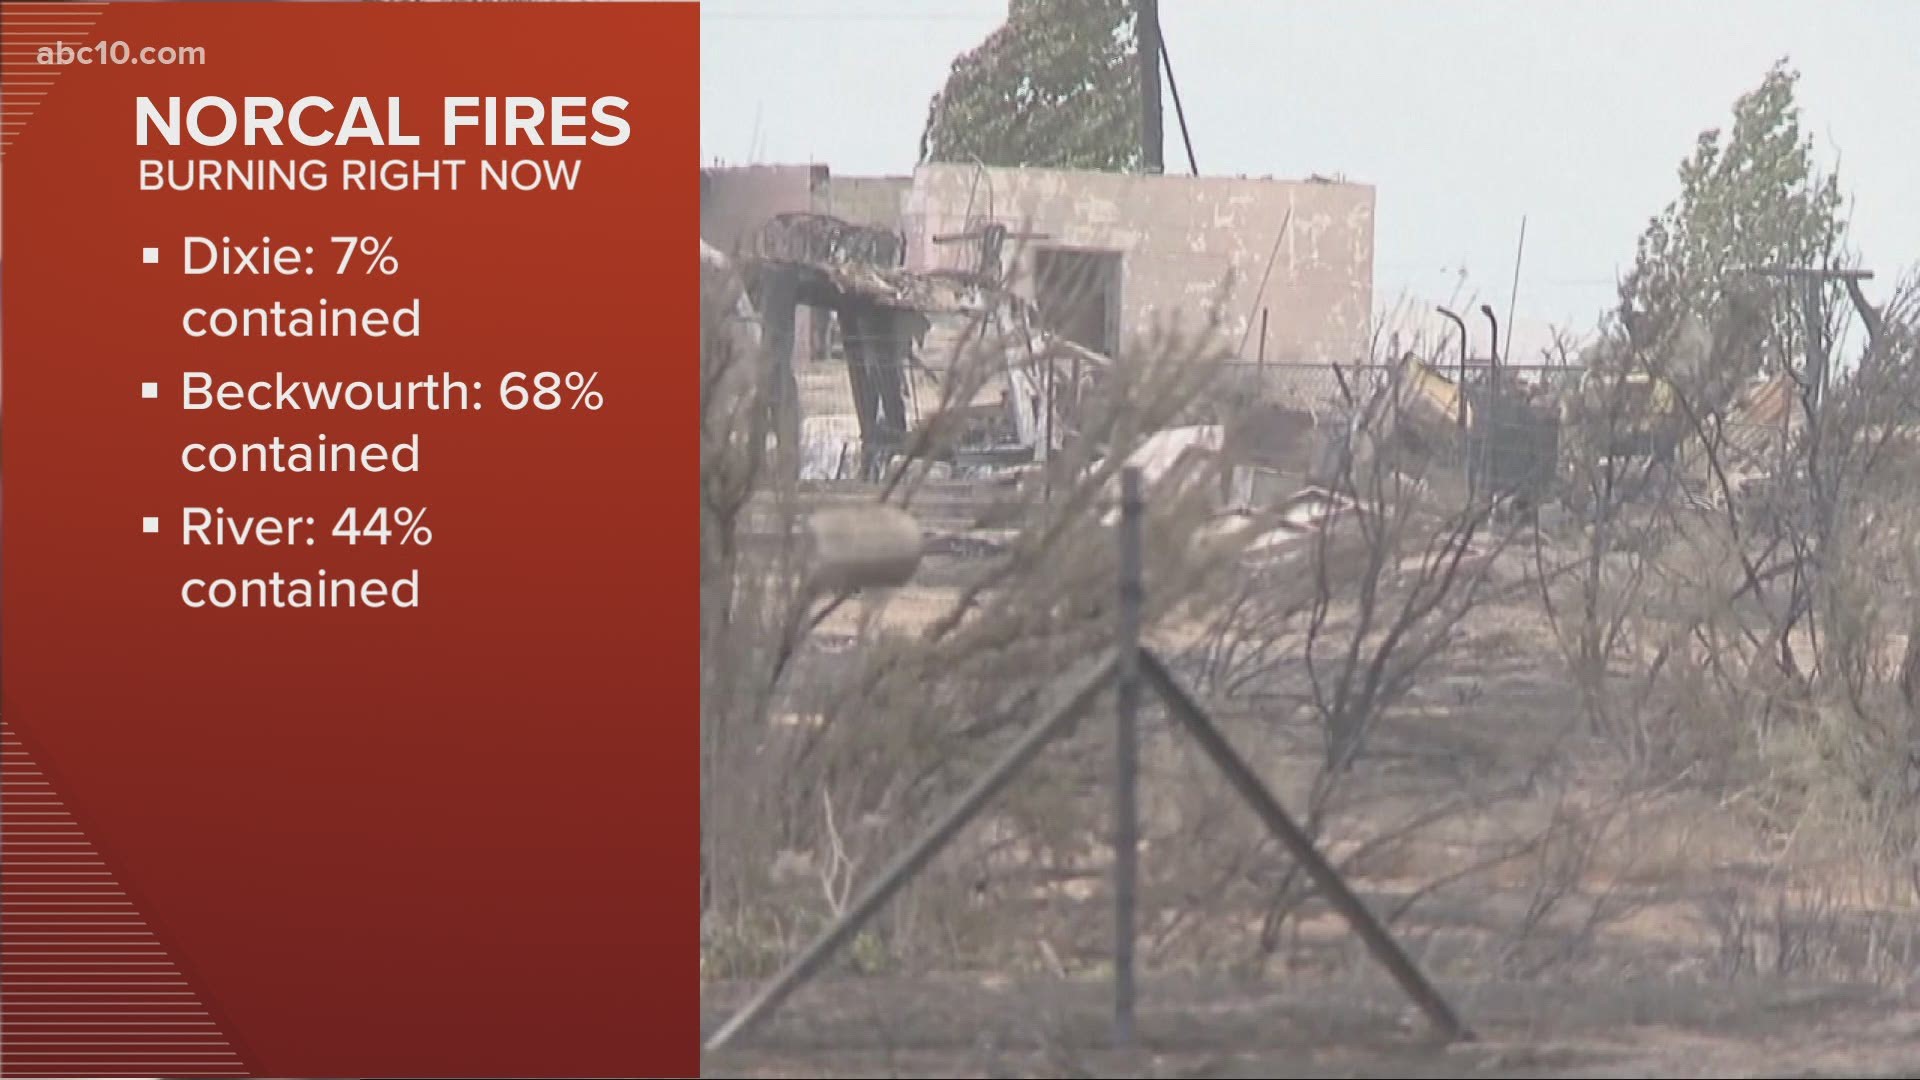 We break down the latest information on wildfires burning in Northern California.